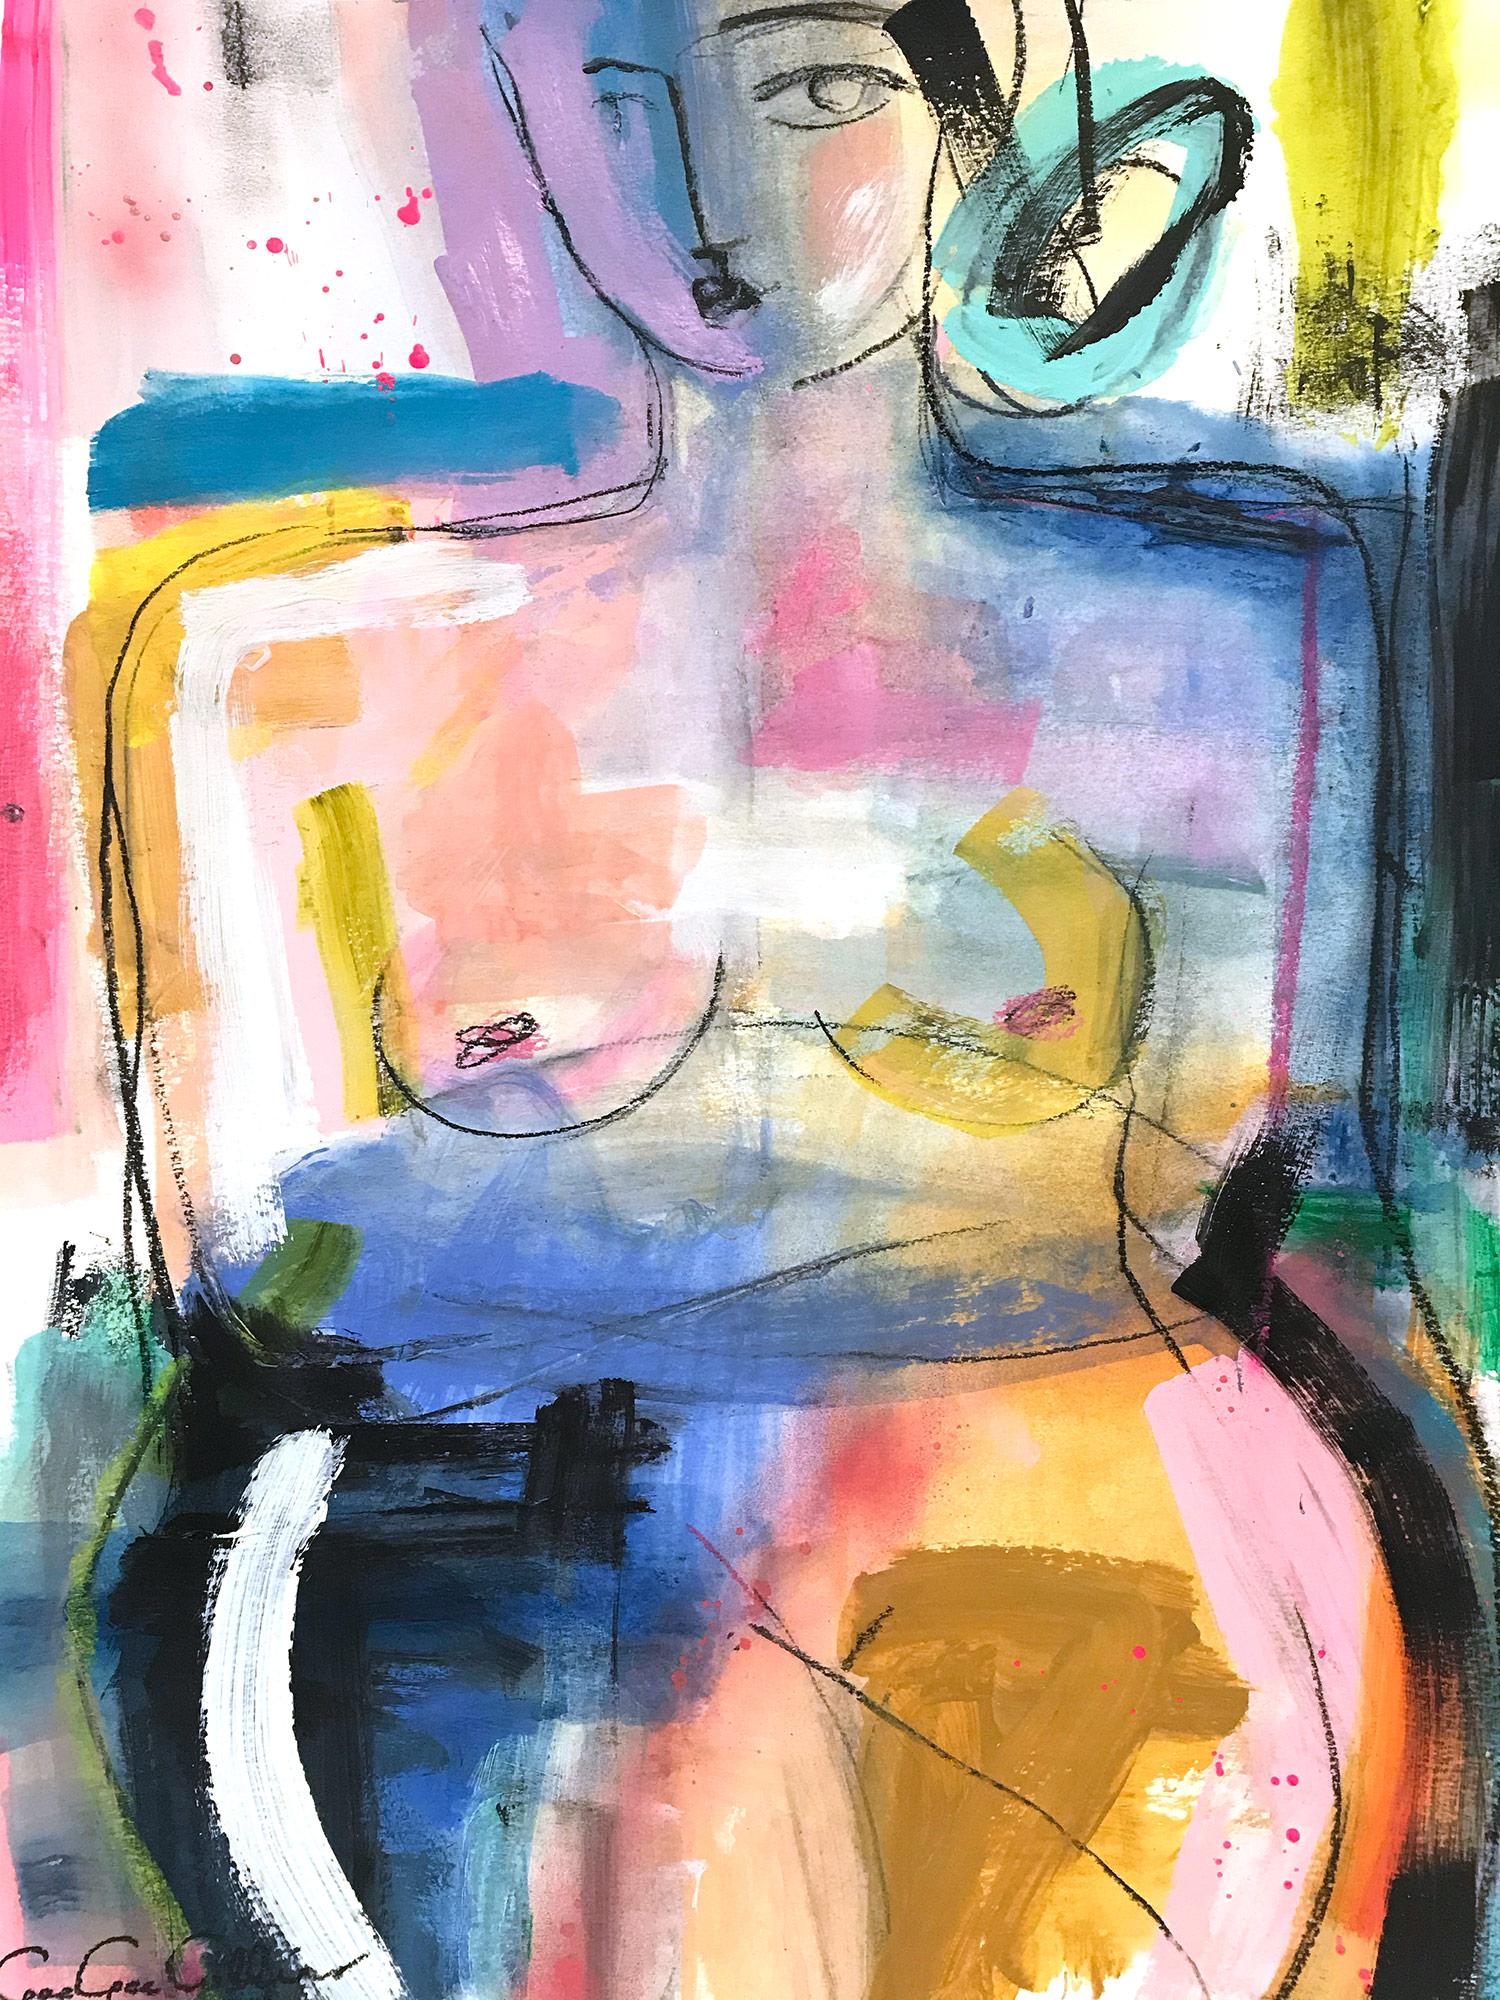 Gee Gee Collins Figurative Painting - "Colorful Nude" Abstract Modern Colorful Nude Painting on Paper